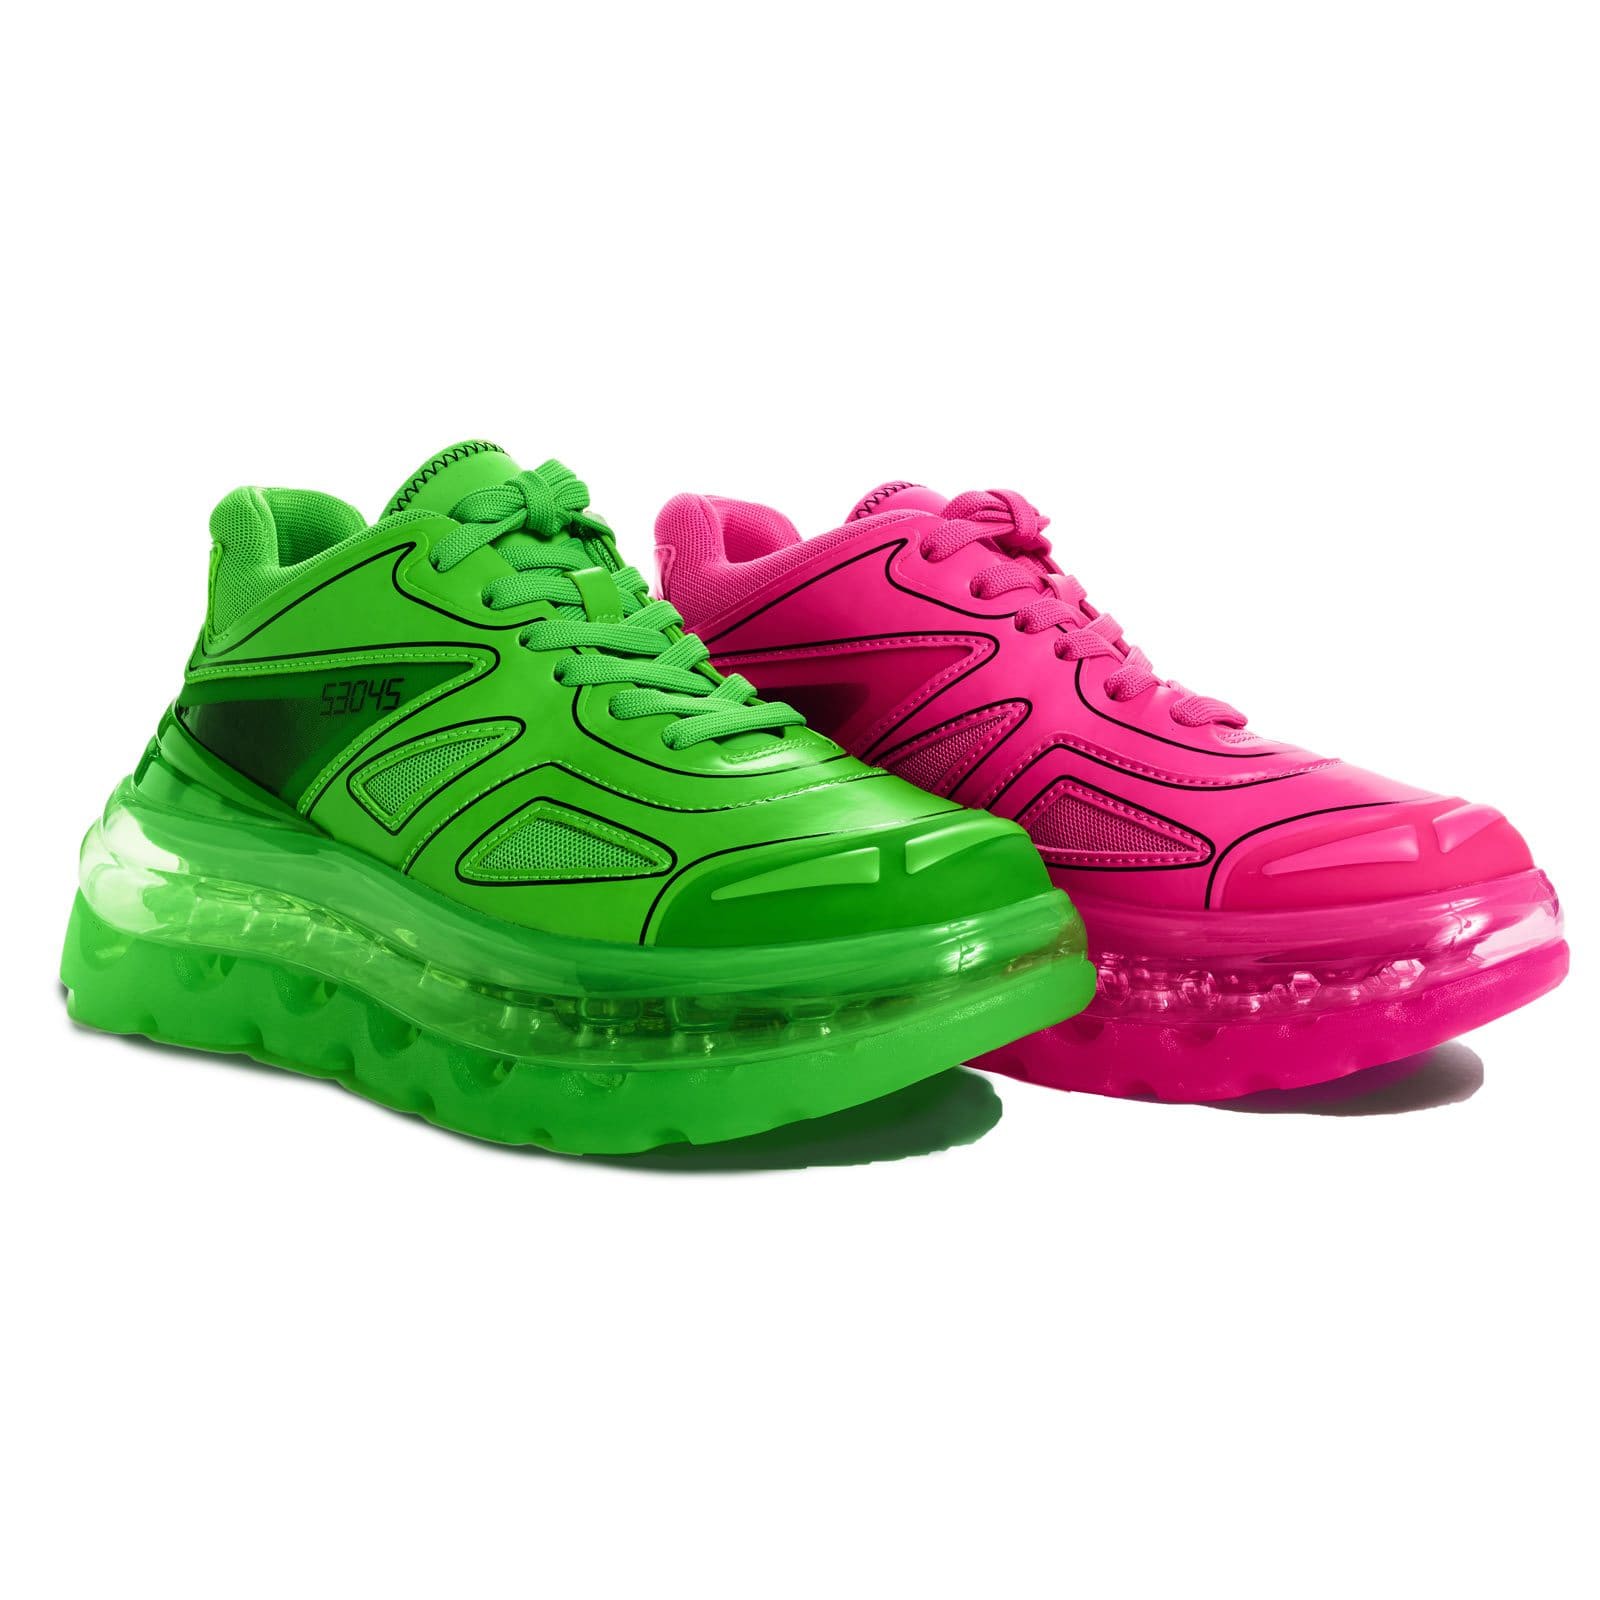 neon pink tennis shoes